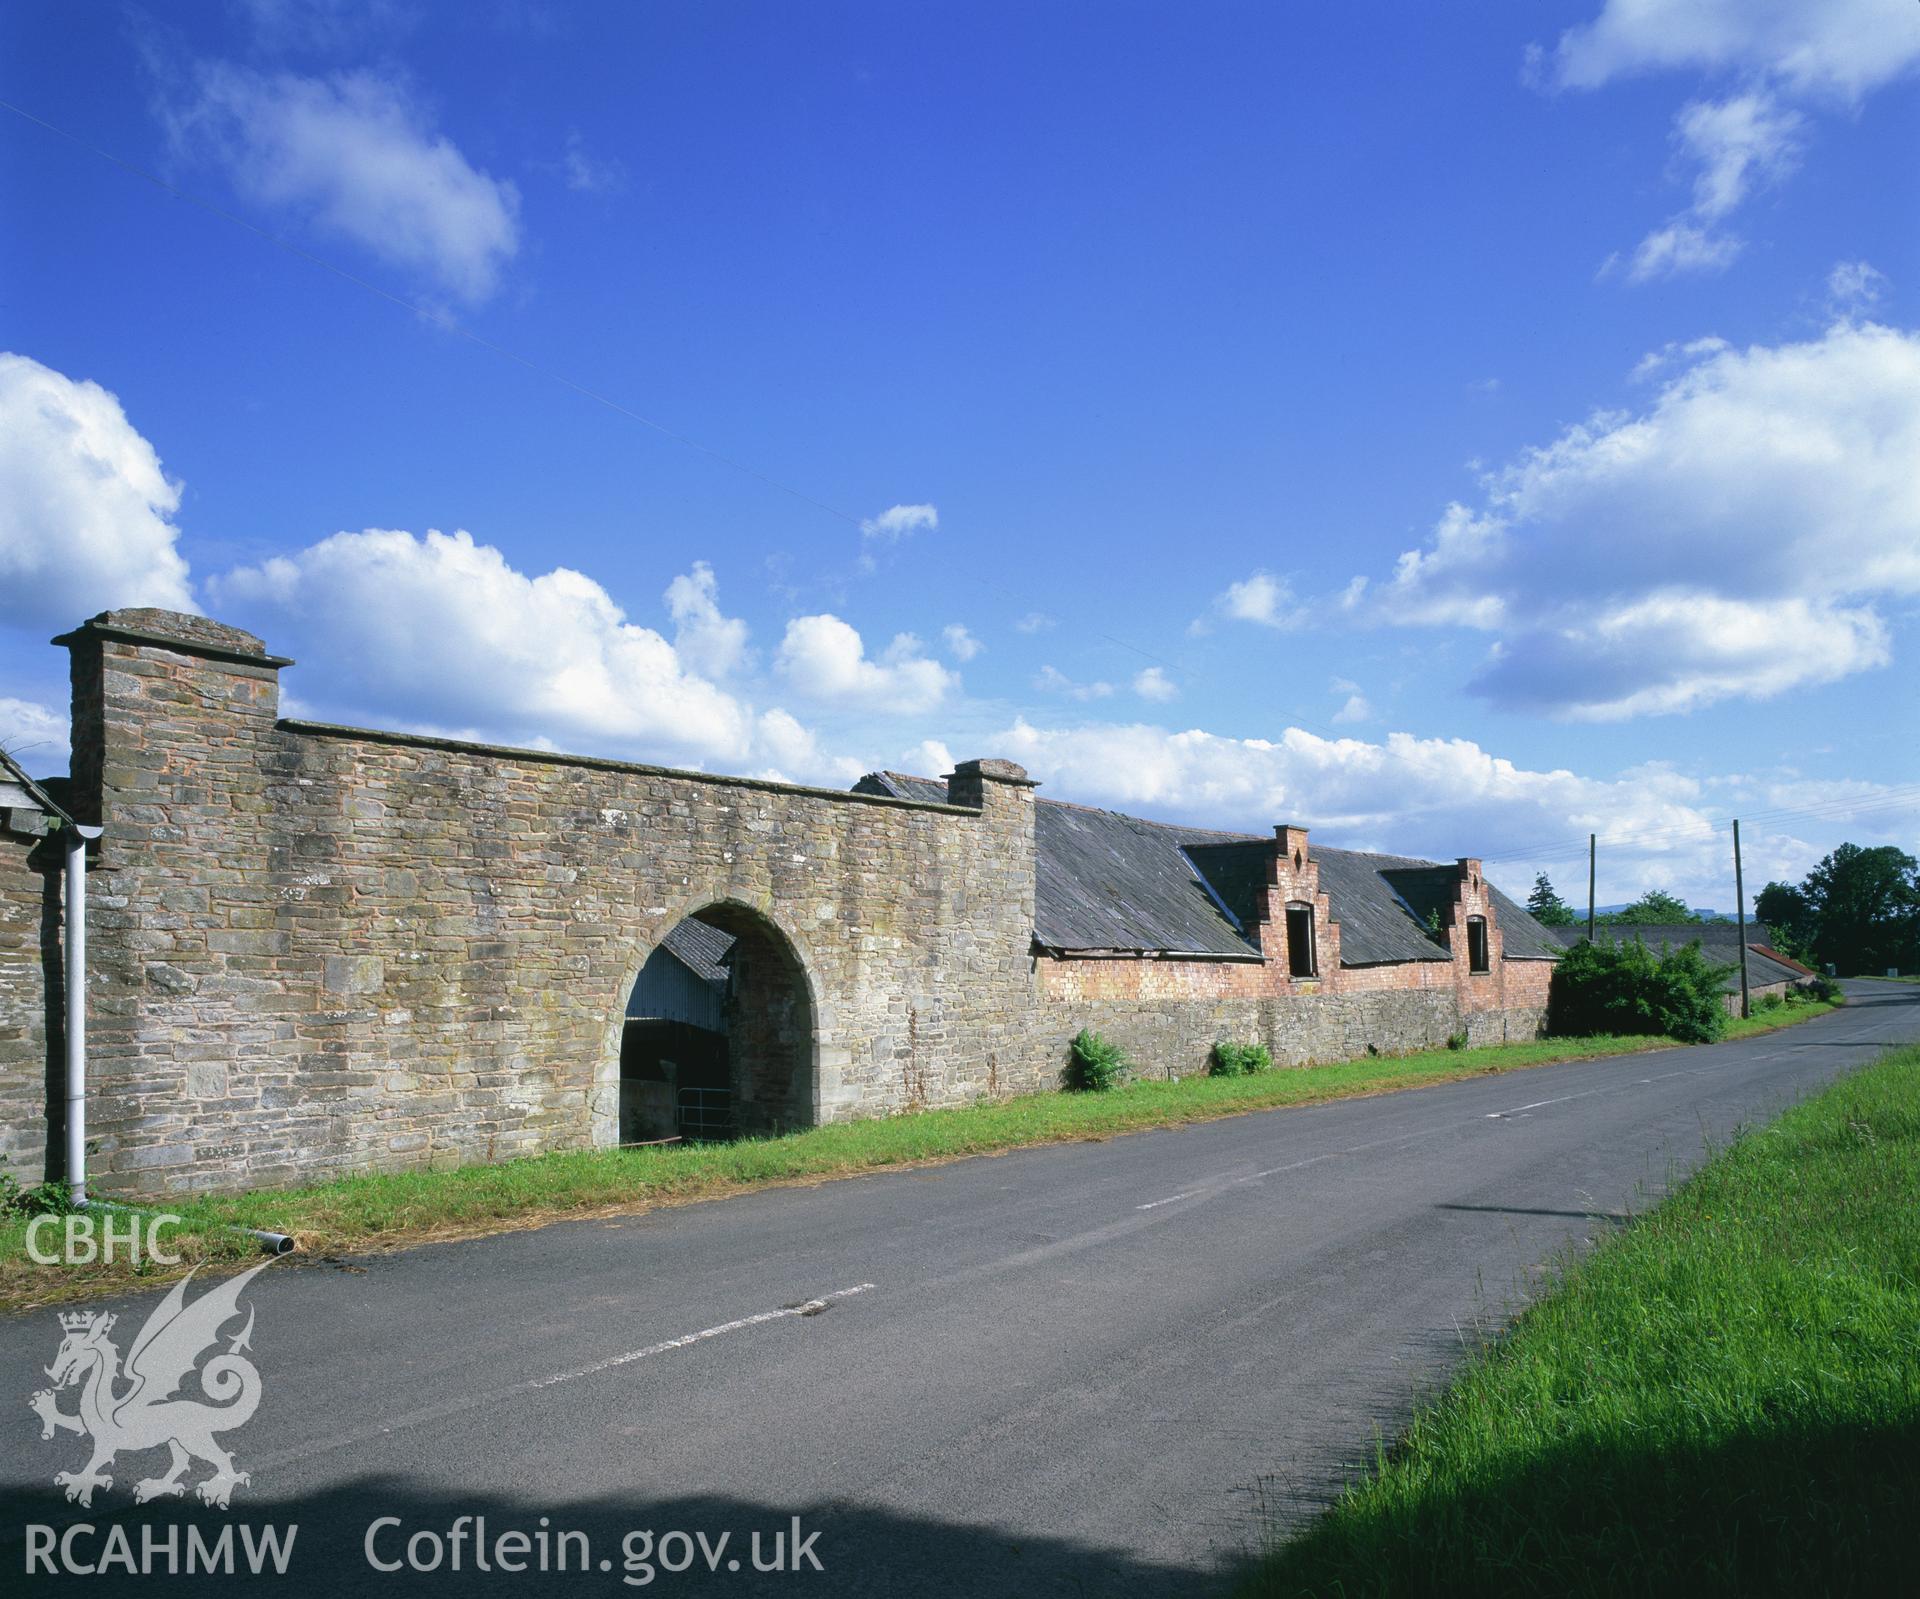 RCAHMW colour transparency showing  view of the main gate at Clyro Court Farm, taken by Fleur James, August 2003